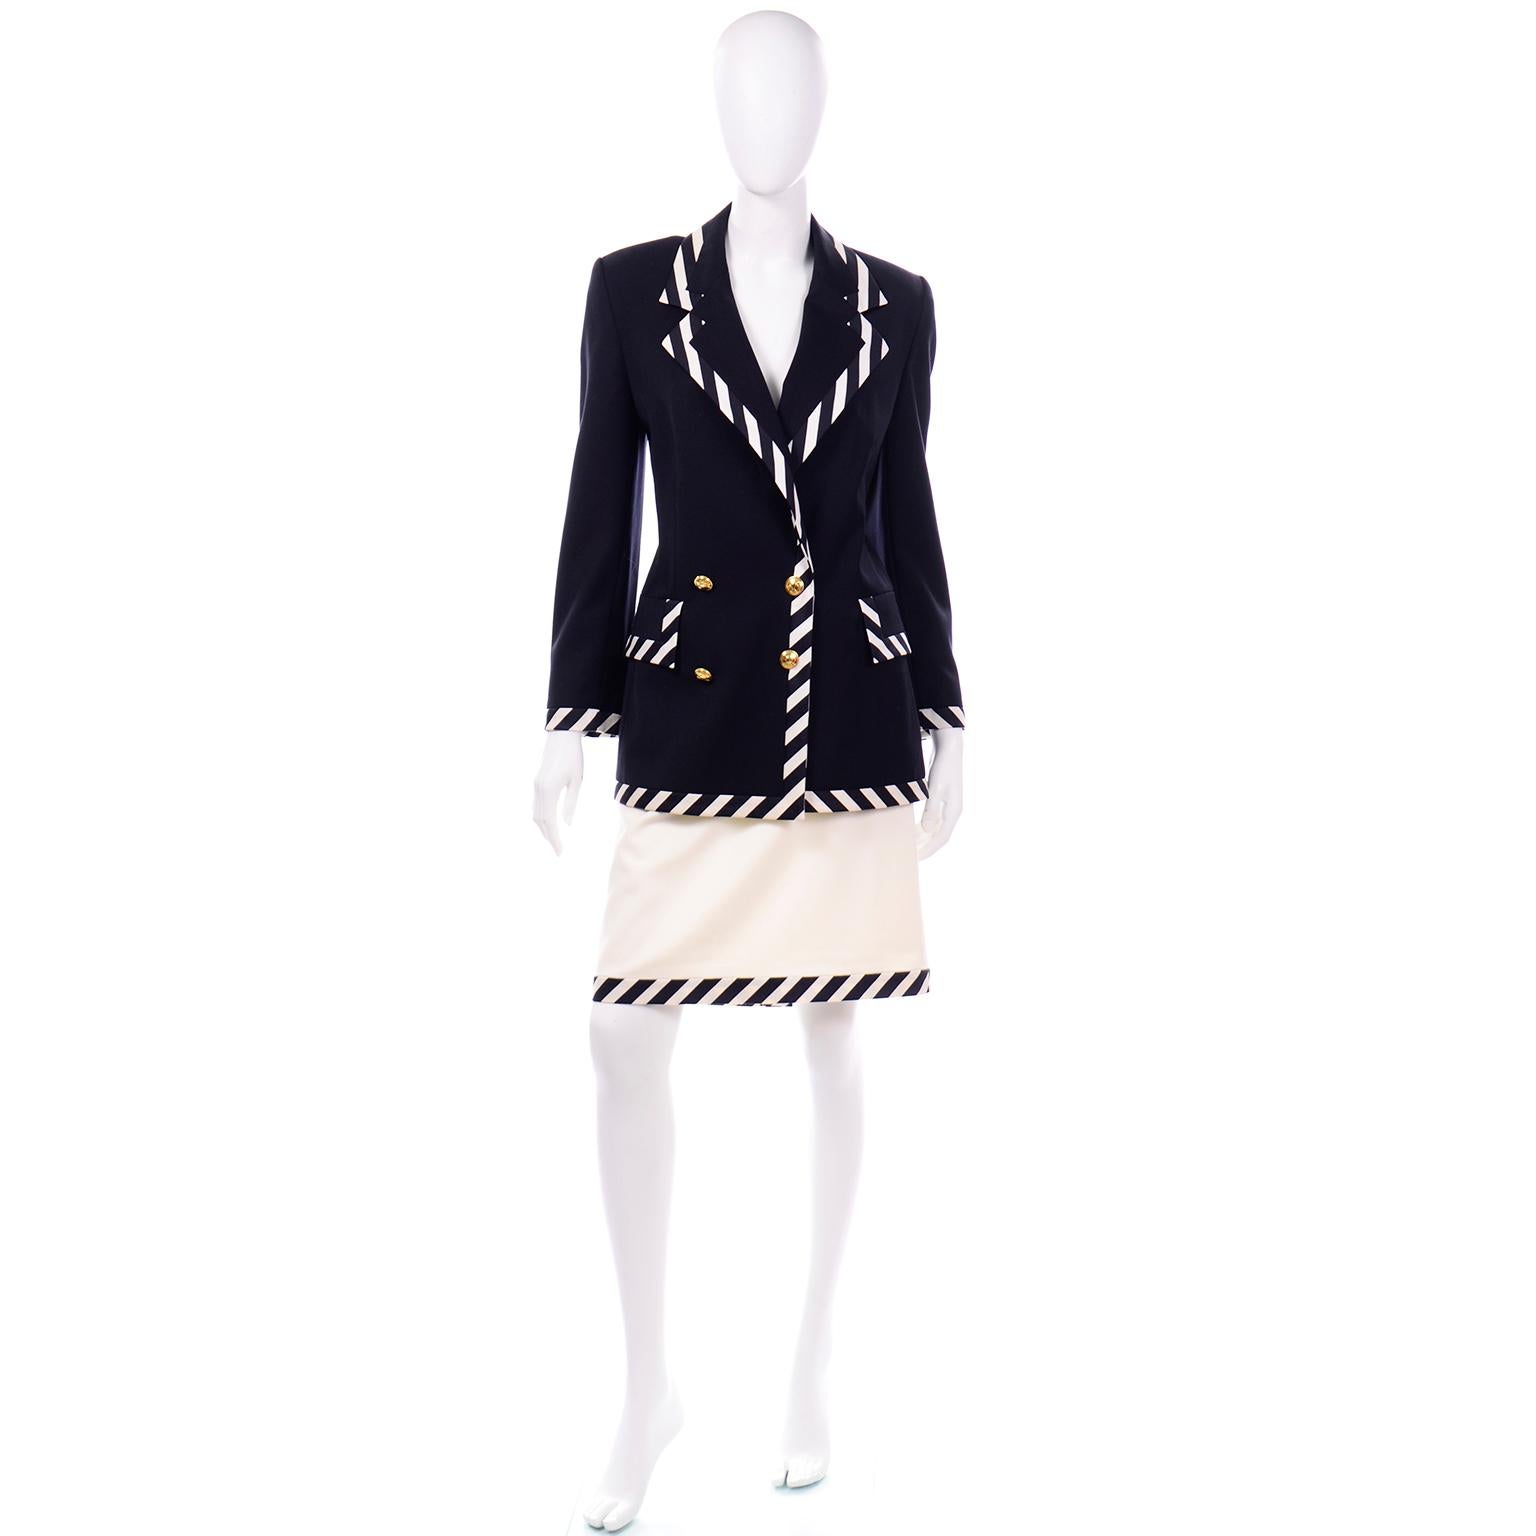 This is a beautiful black and white stripe Summer weight wool skirt suit designed by Margaretha Ley for Escada. The suit includes a black double breasted blazer with pretty gold buttons at the front opening and functional flap pockets. The shoulders